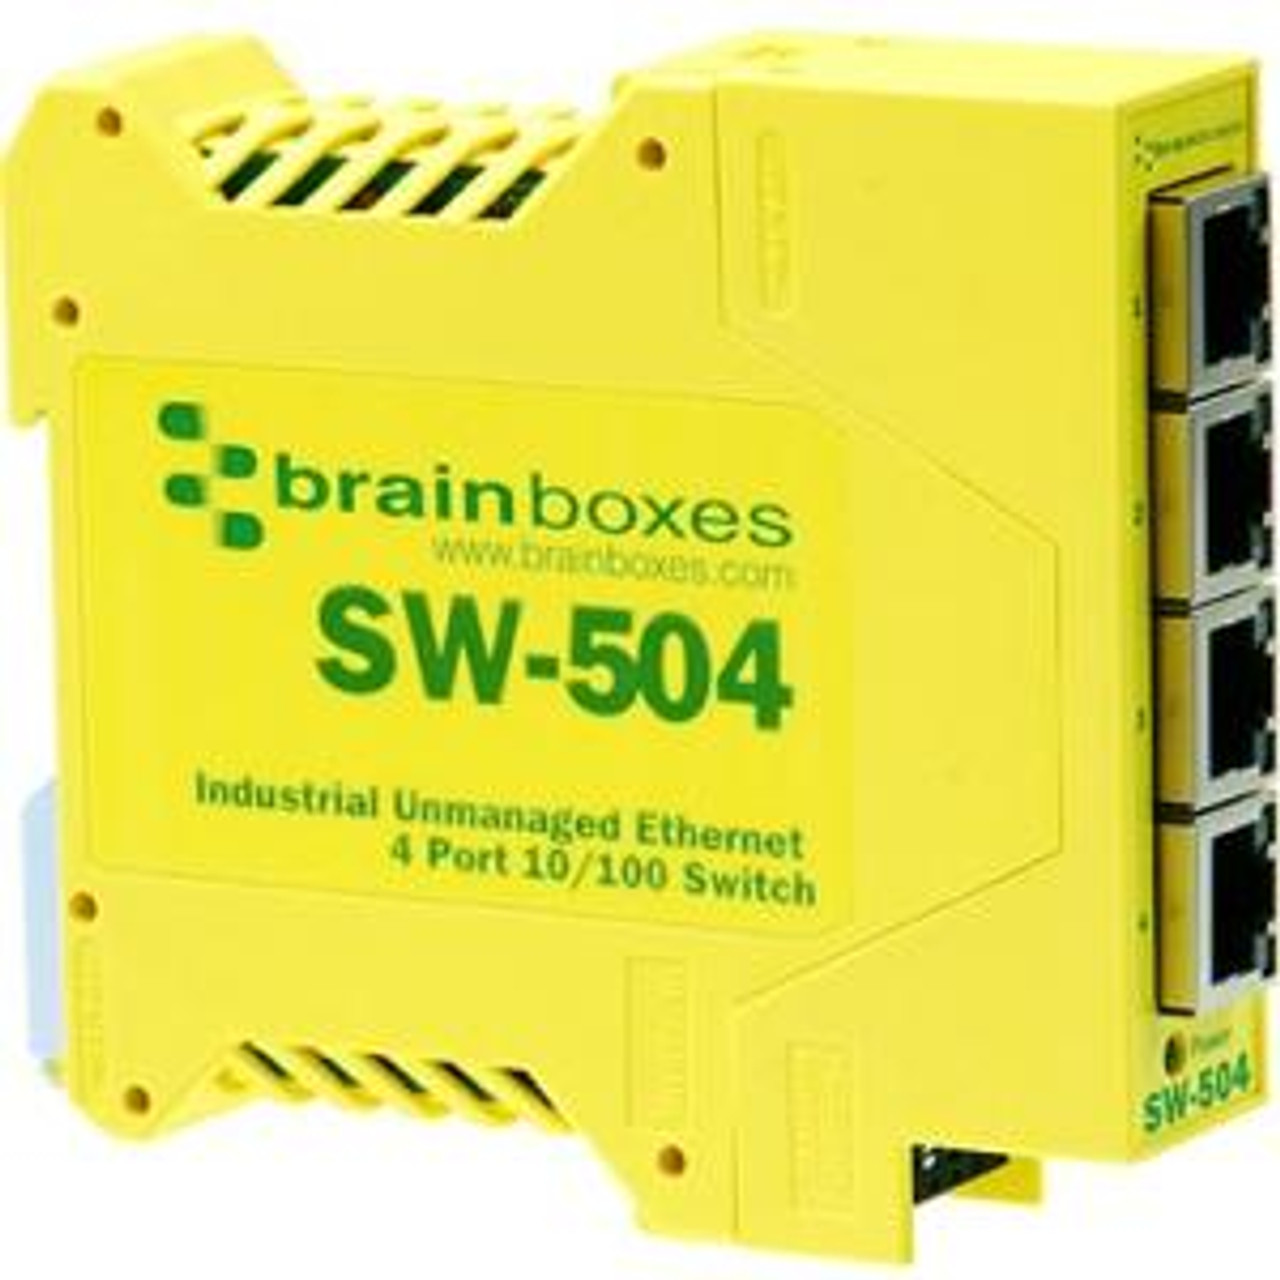 SW-504-X20M Brainboxes SW-504 Industrial Unmanaged Ethernet Switch 4 Ports 4 Network Twisted Pair 2 Layer Supported Rail-mountable  (Refurbished)